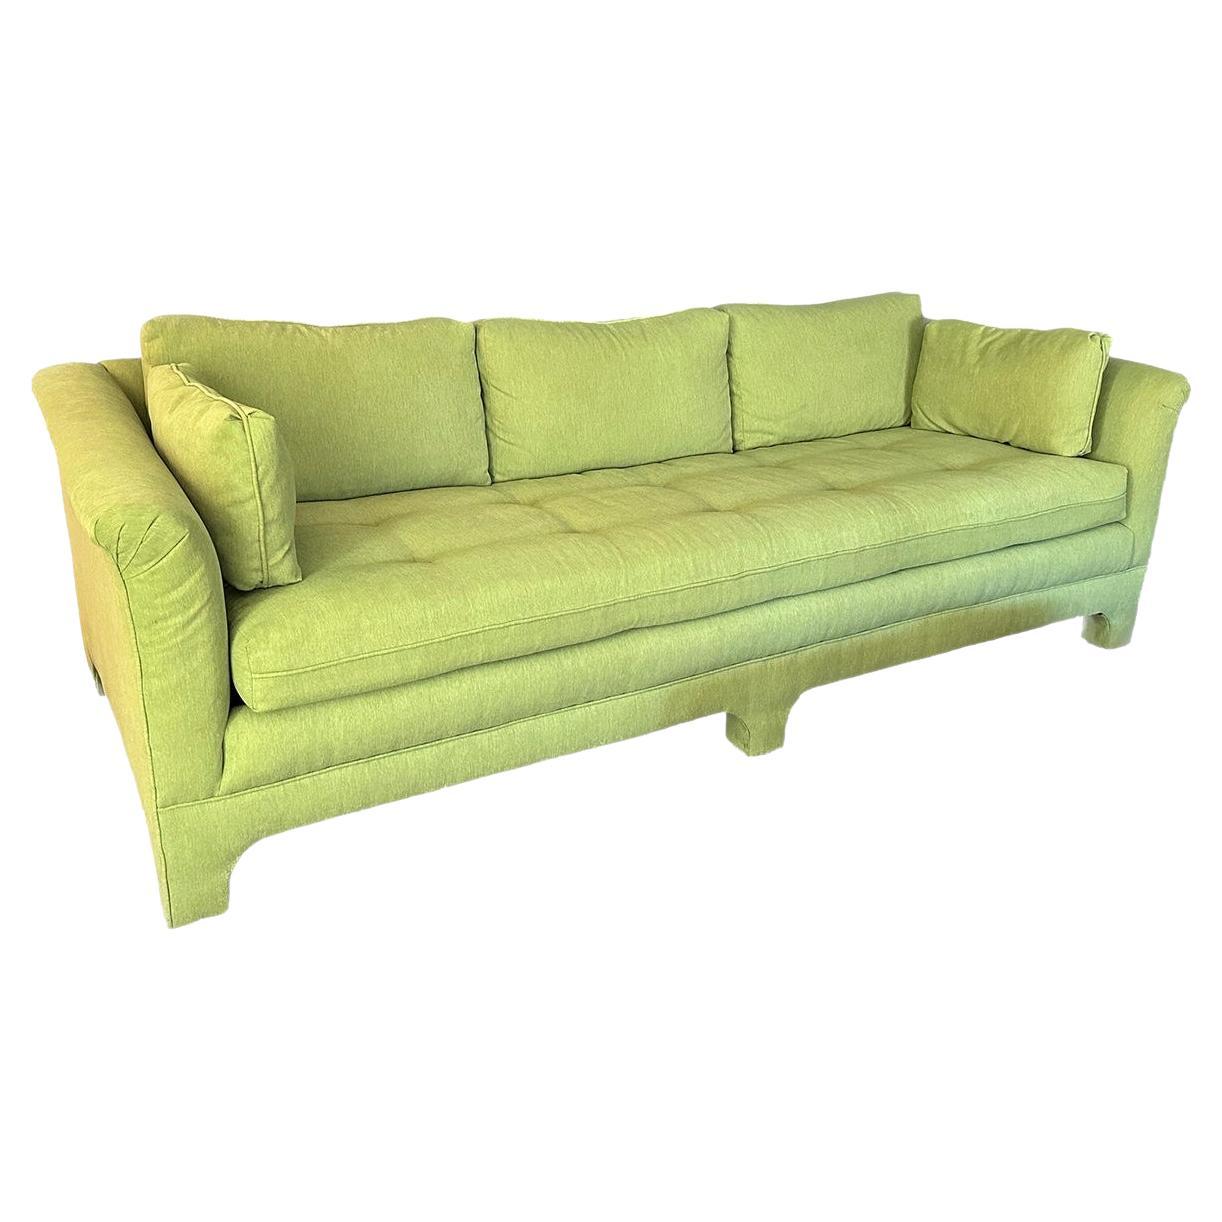 Vintage 70s Bench Seat Sofa Newly Upholstered in Chartreuse Crypton Fabric For Sale